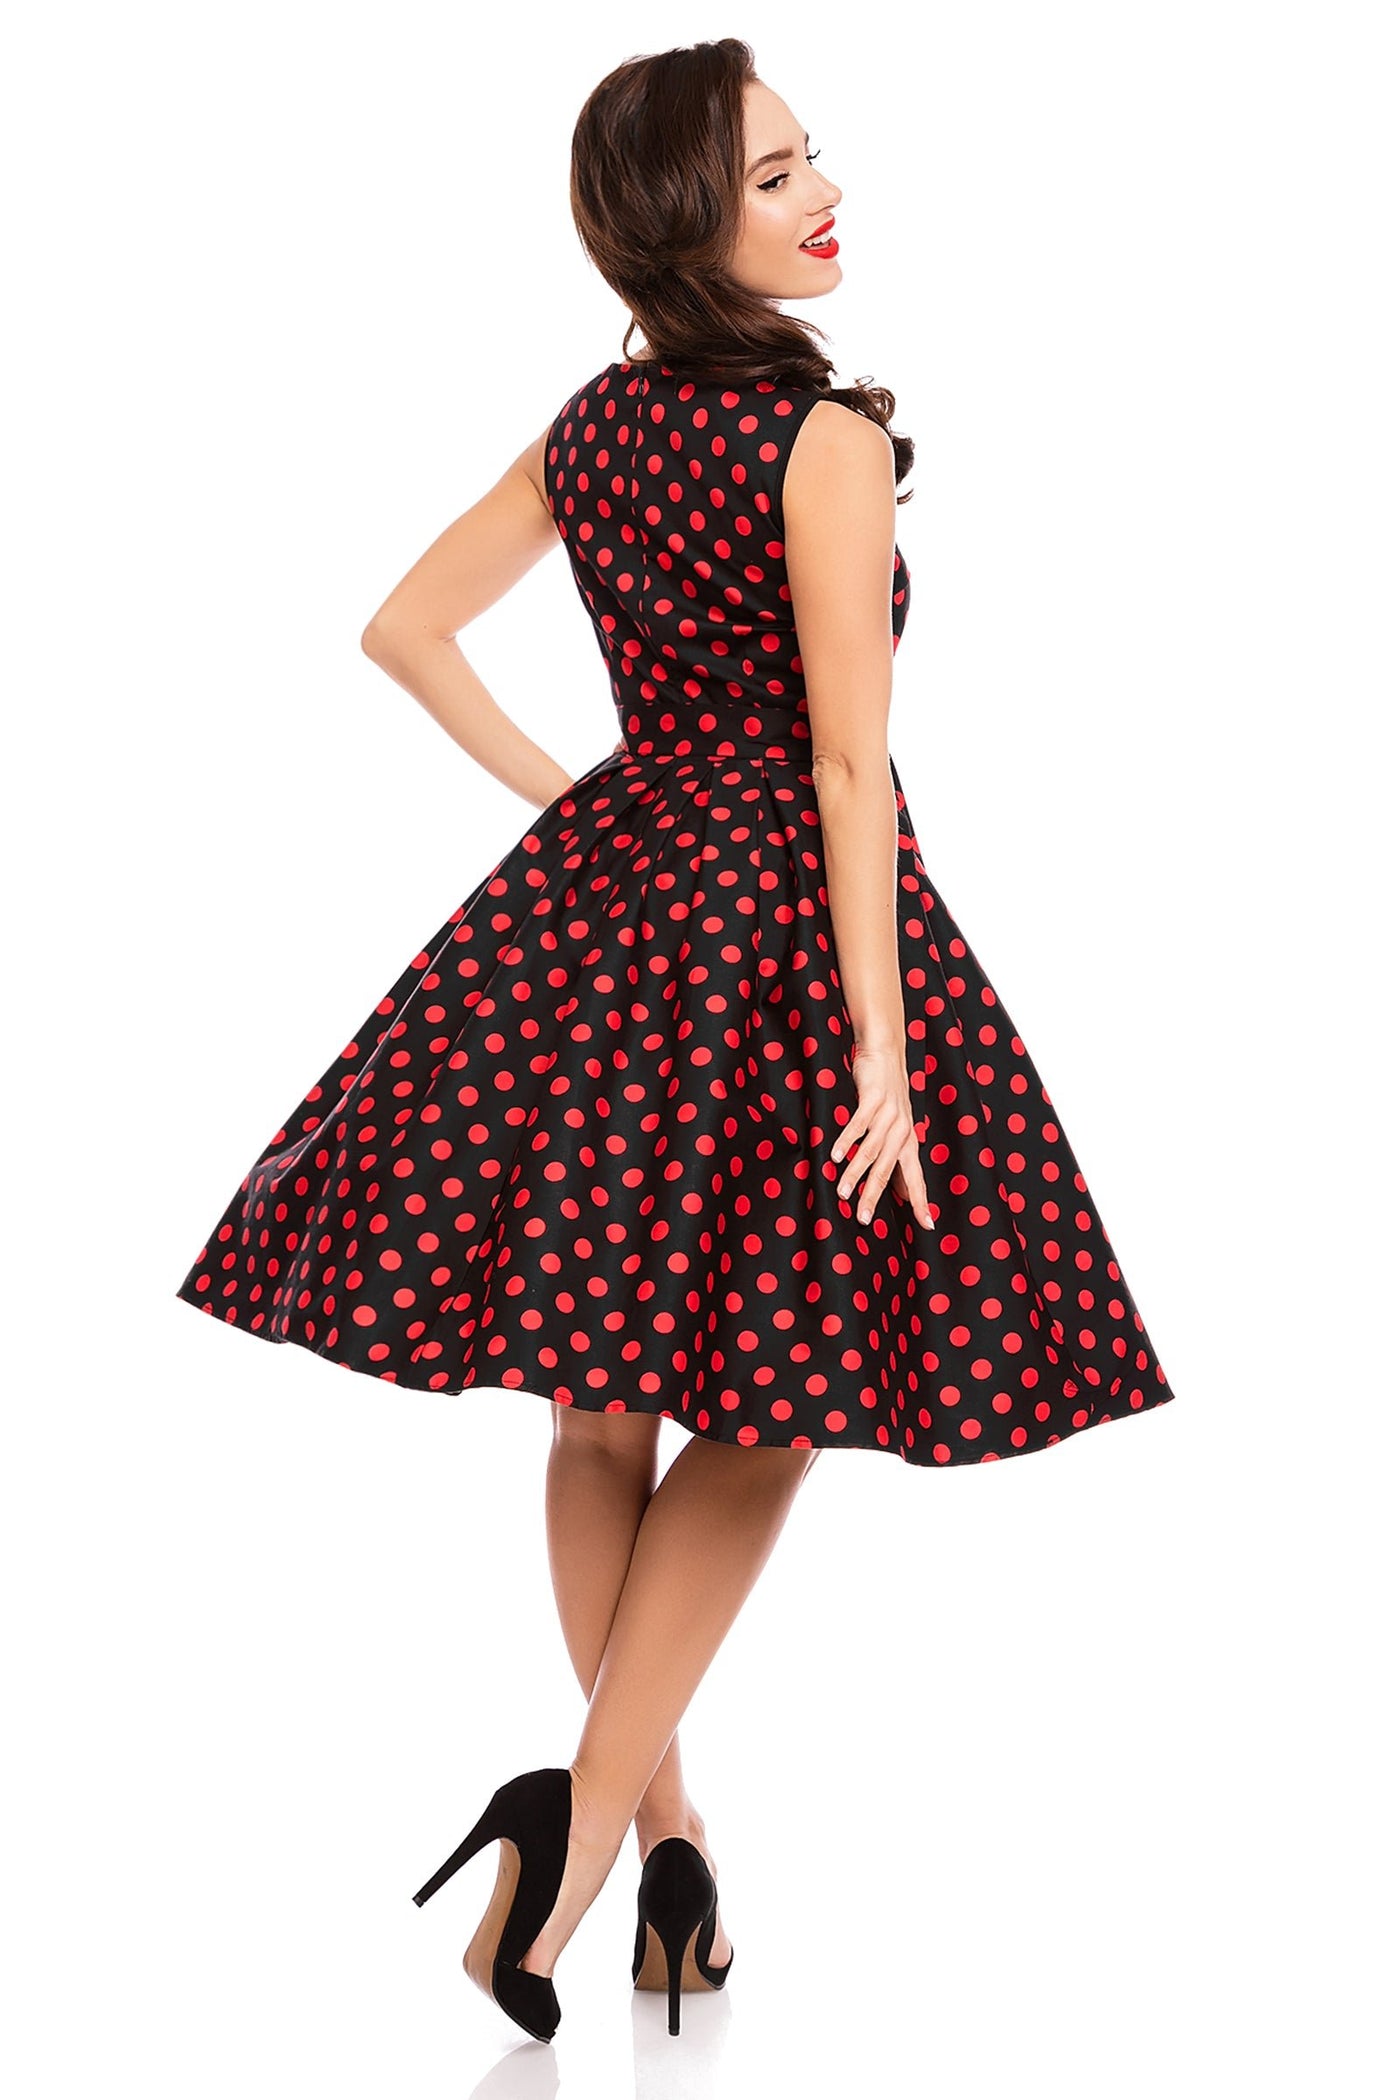 Vintage Style Evening Party Dress in Black/Red